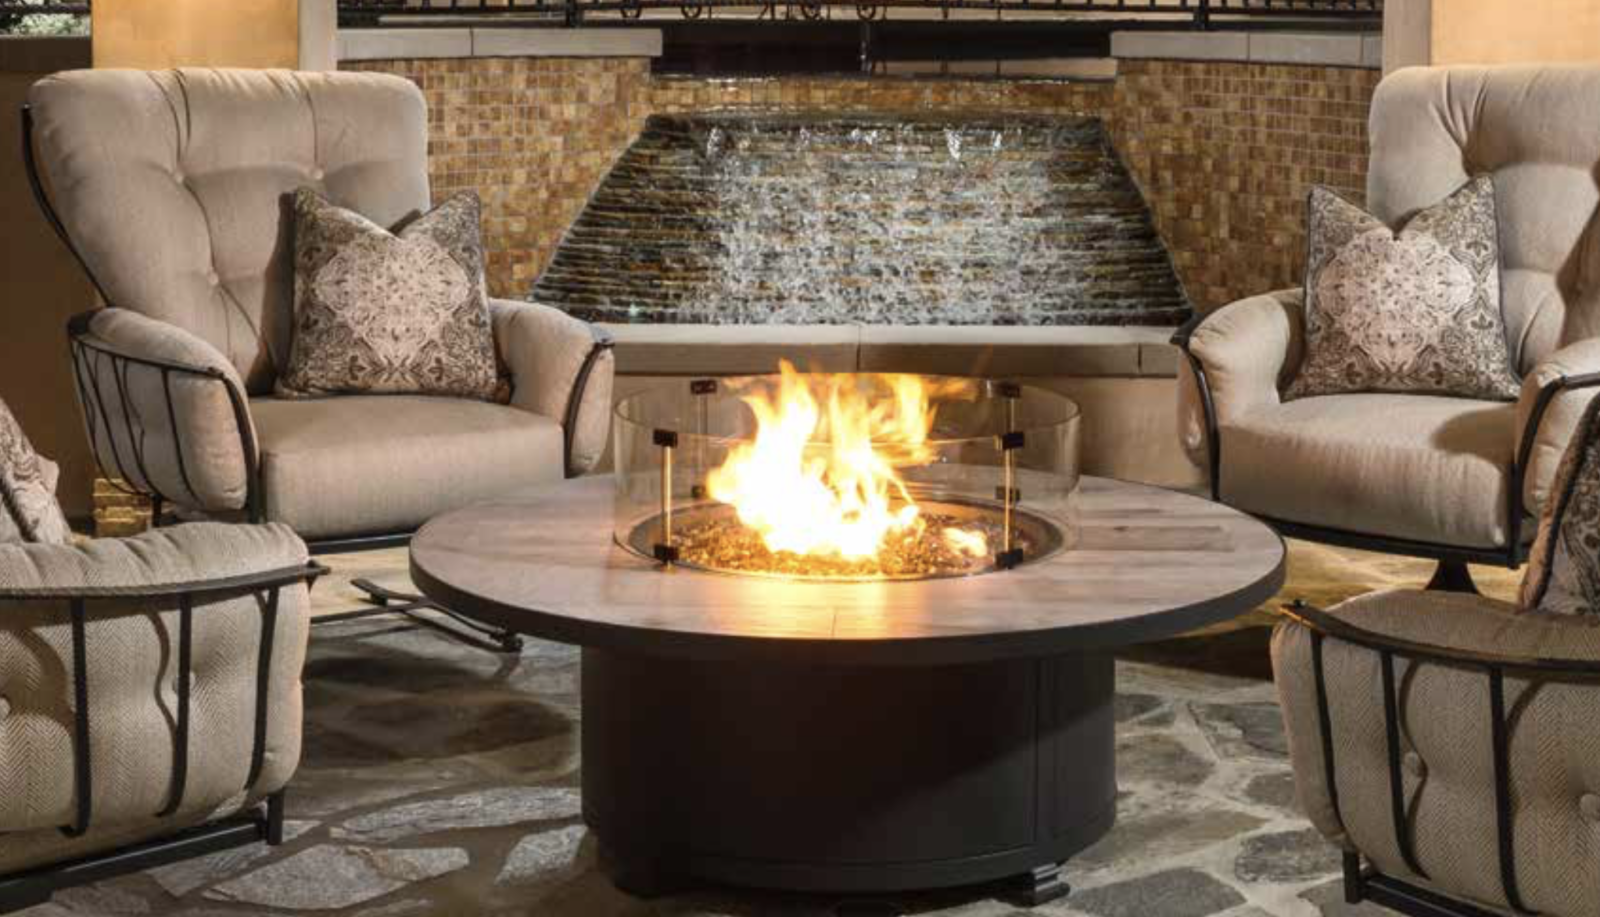 Ow Lee Fire Pit Contemporary, Ow Lee Fire Pits